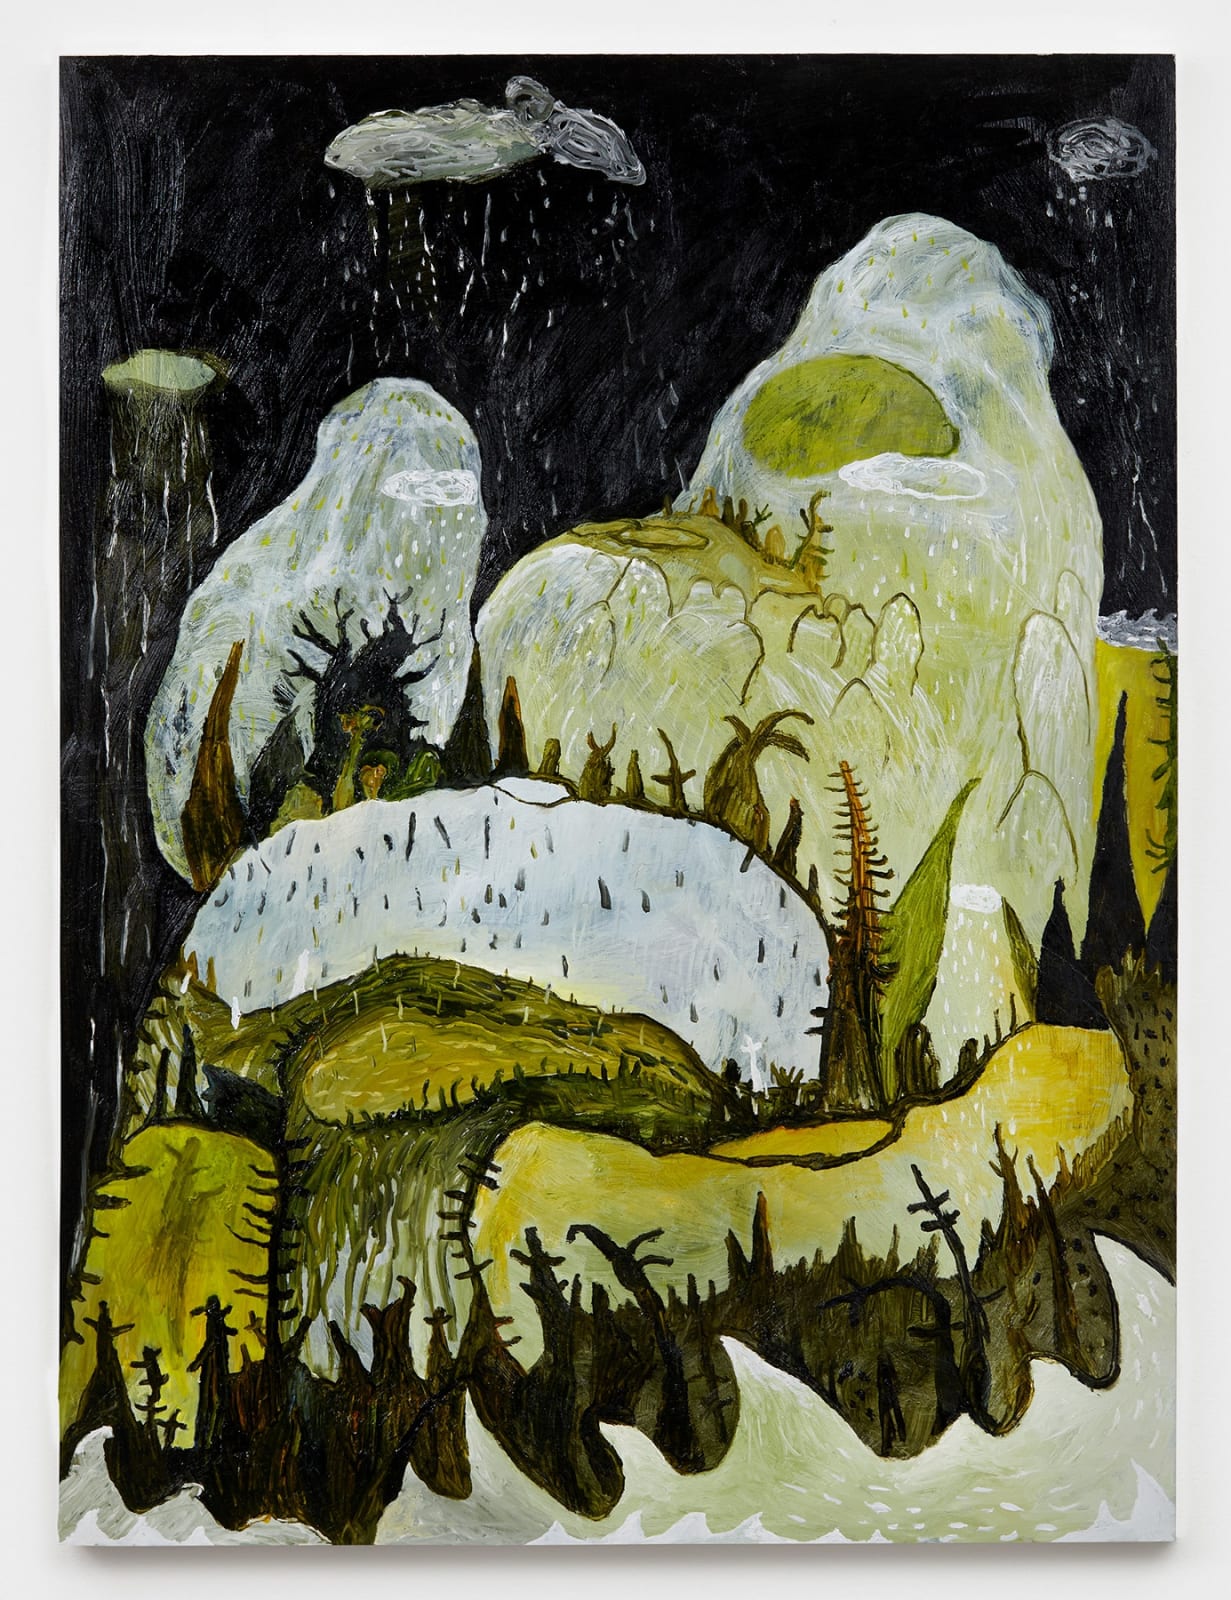 Ghost Mountain Deluge, 2022 Oil on wood panel 48 x 36 in. (121.9 x 91.4 cm.) (ML 38) $13,000